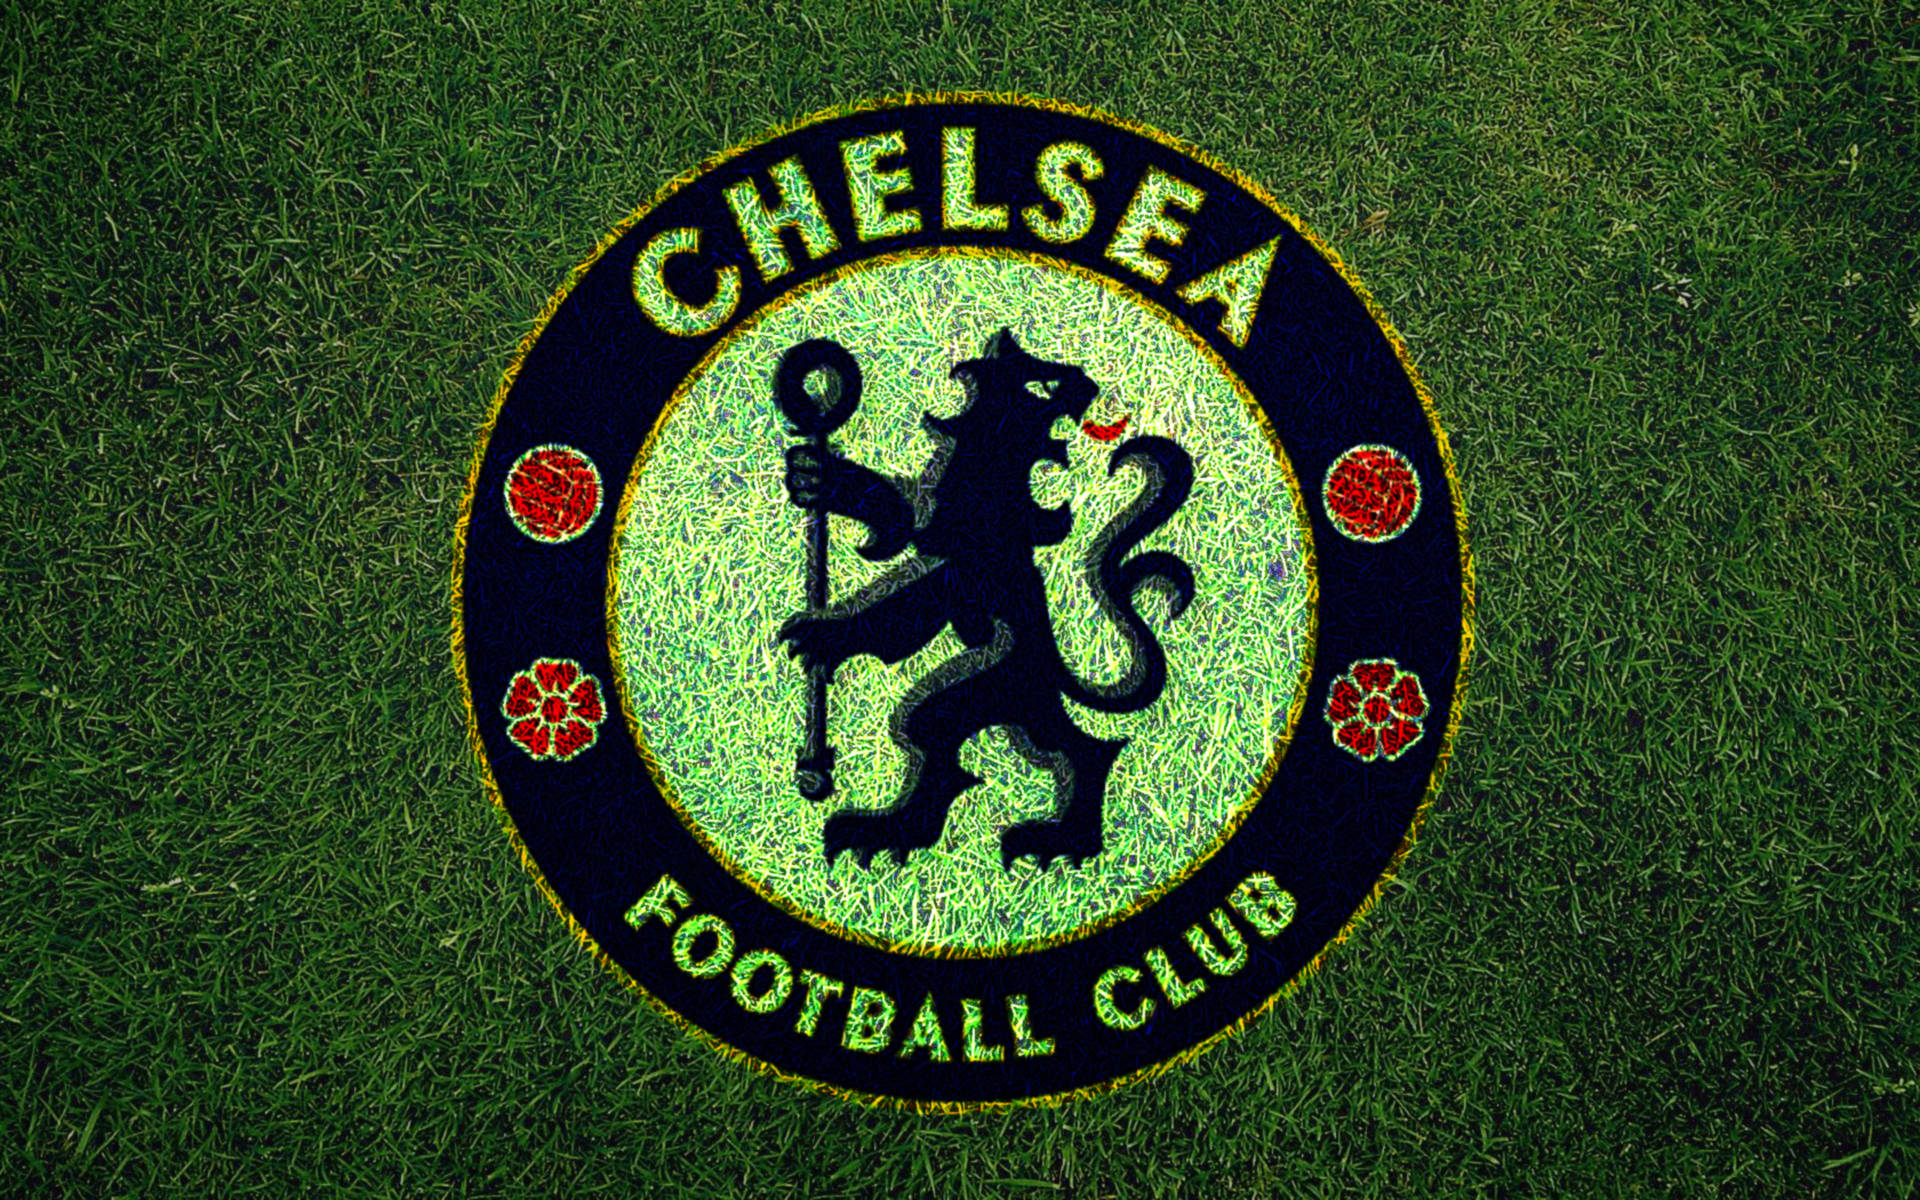 1920X1200 Chelsea Wallpaper and Background